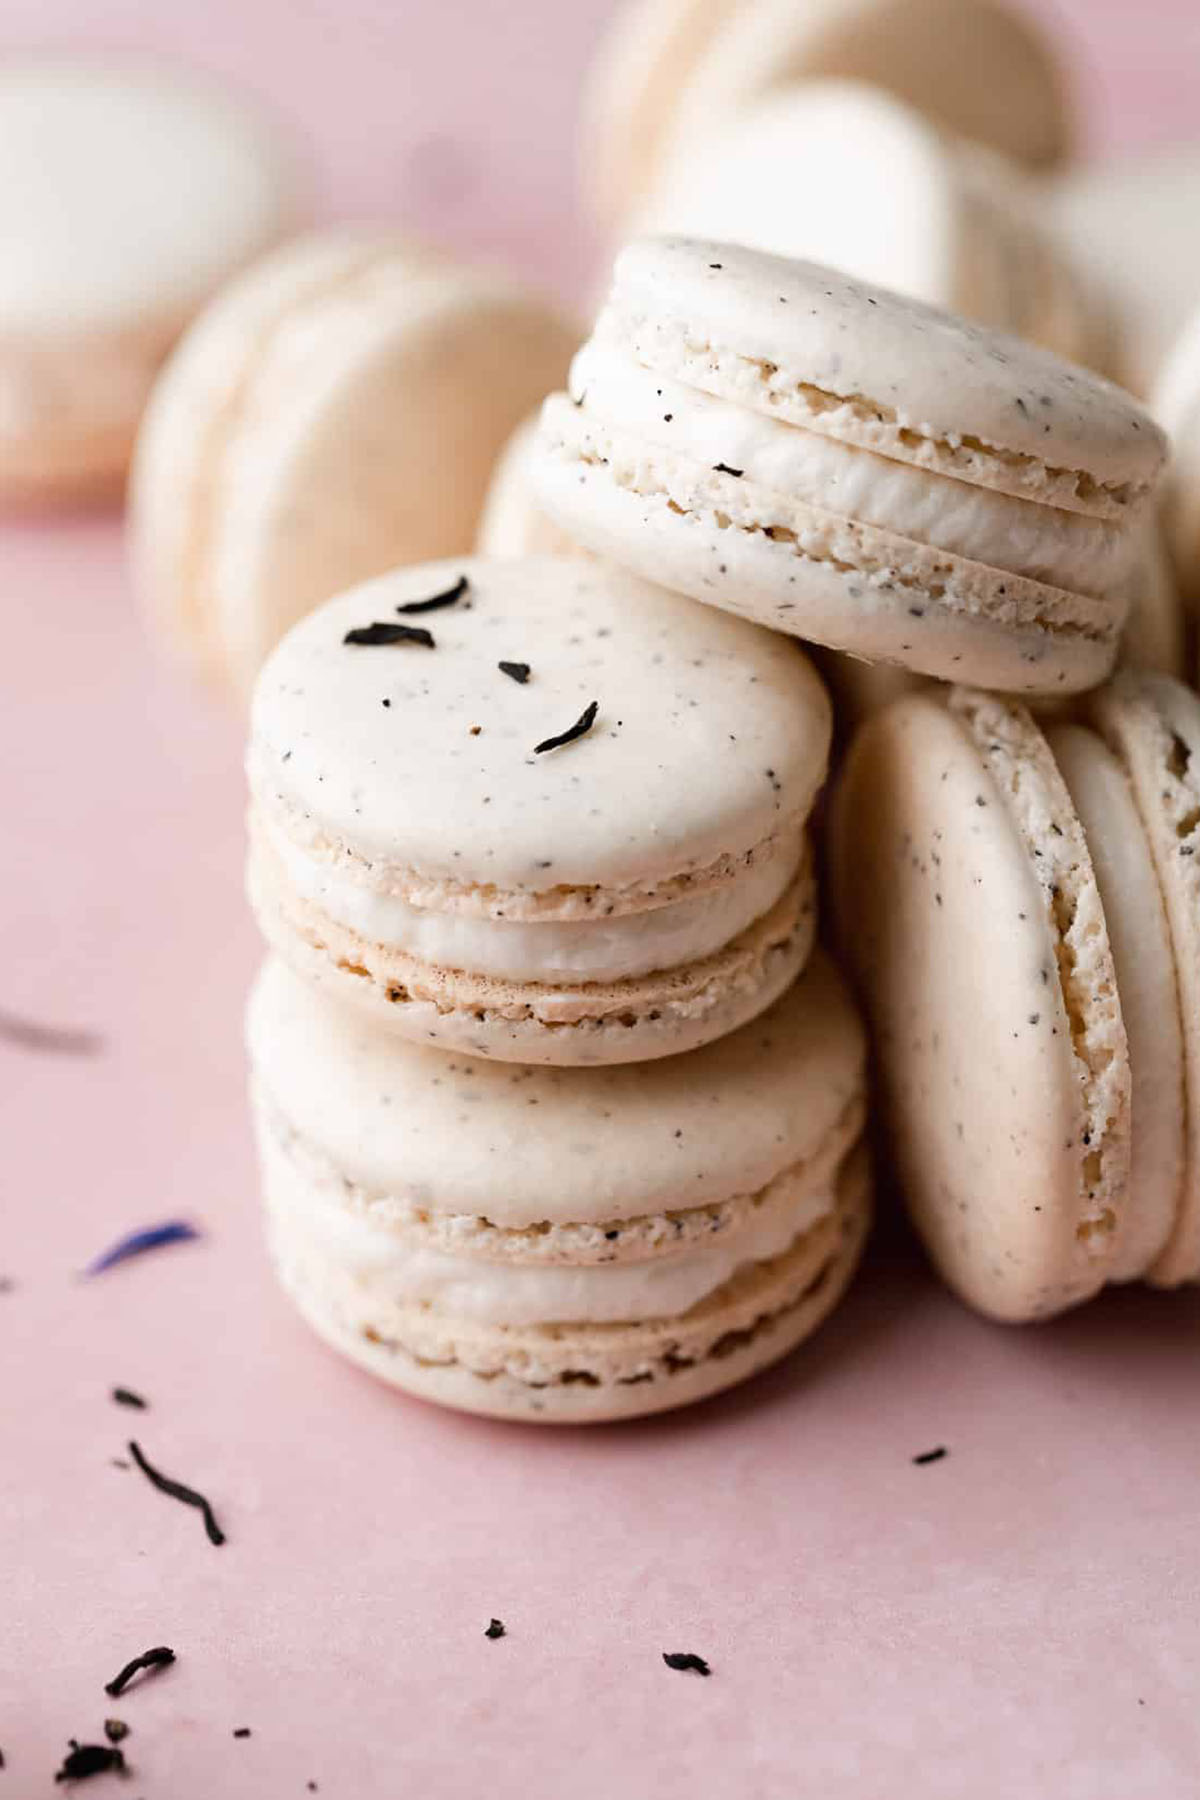 earl grey flavored macarons stacked on top of each other.